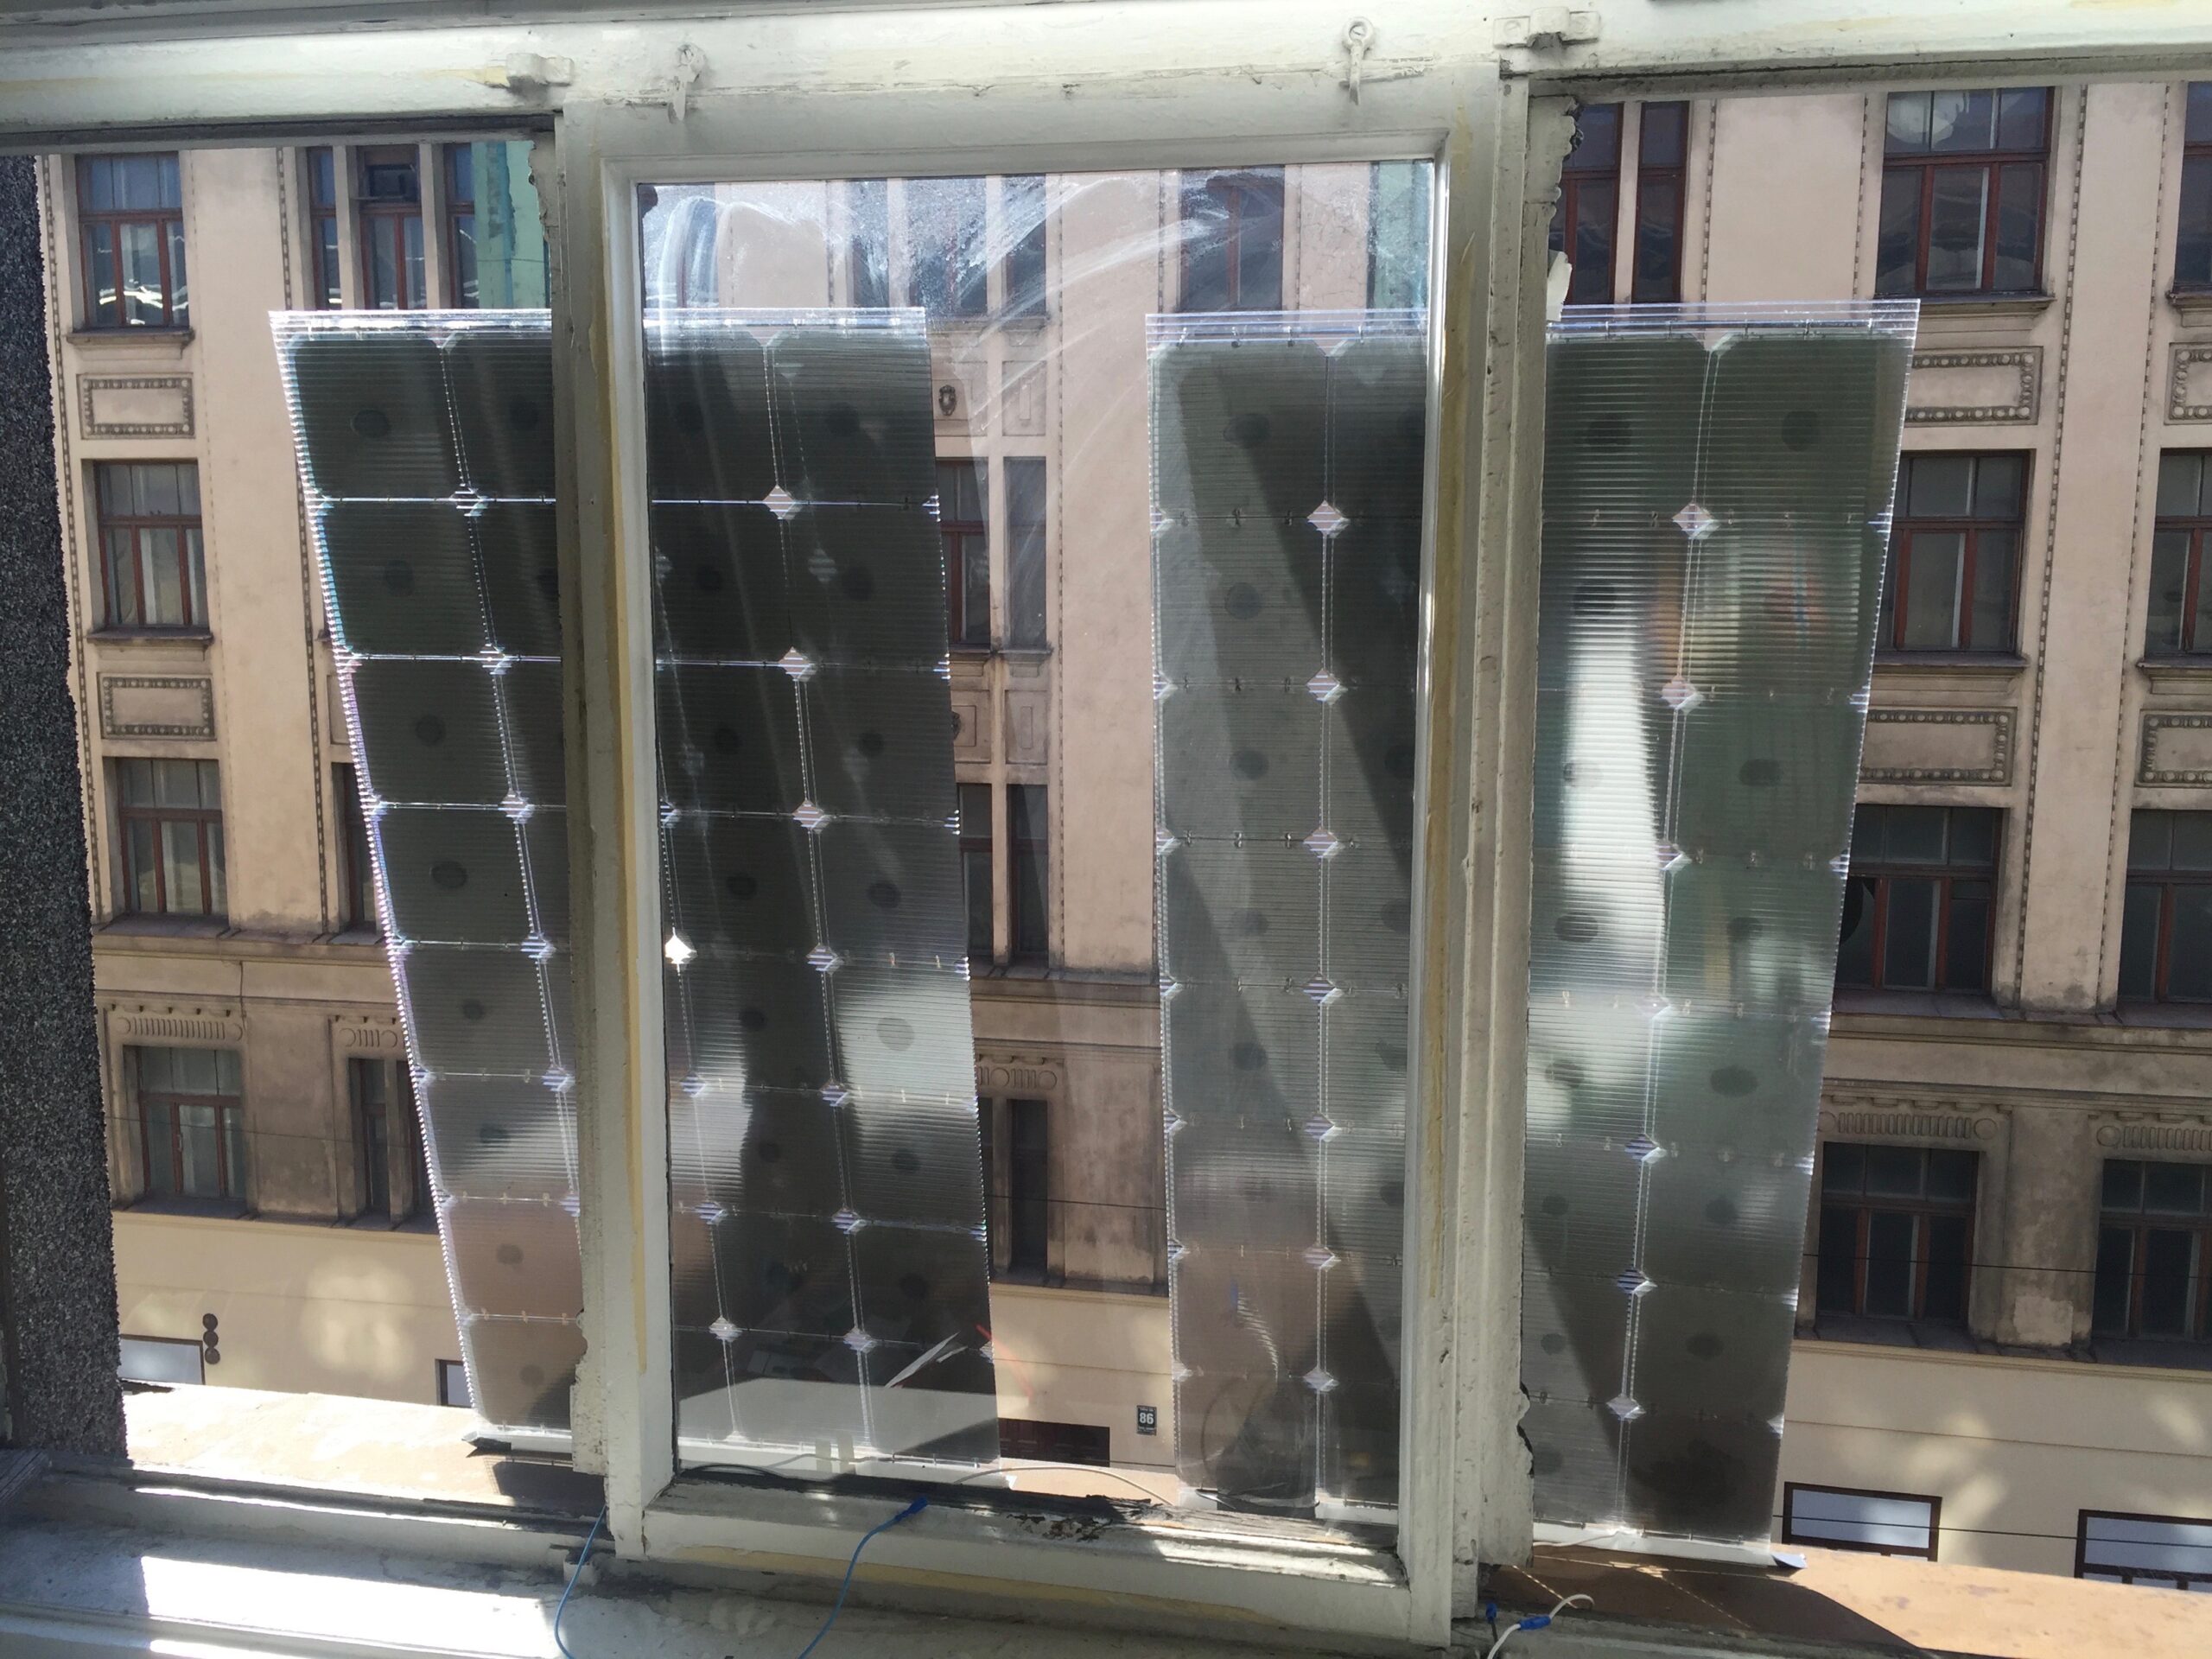 Testing solar panel output in an apartment.(Source: flickr)